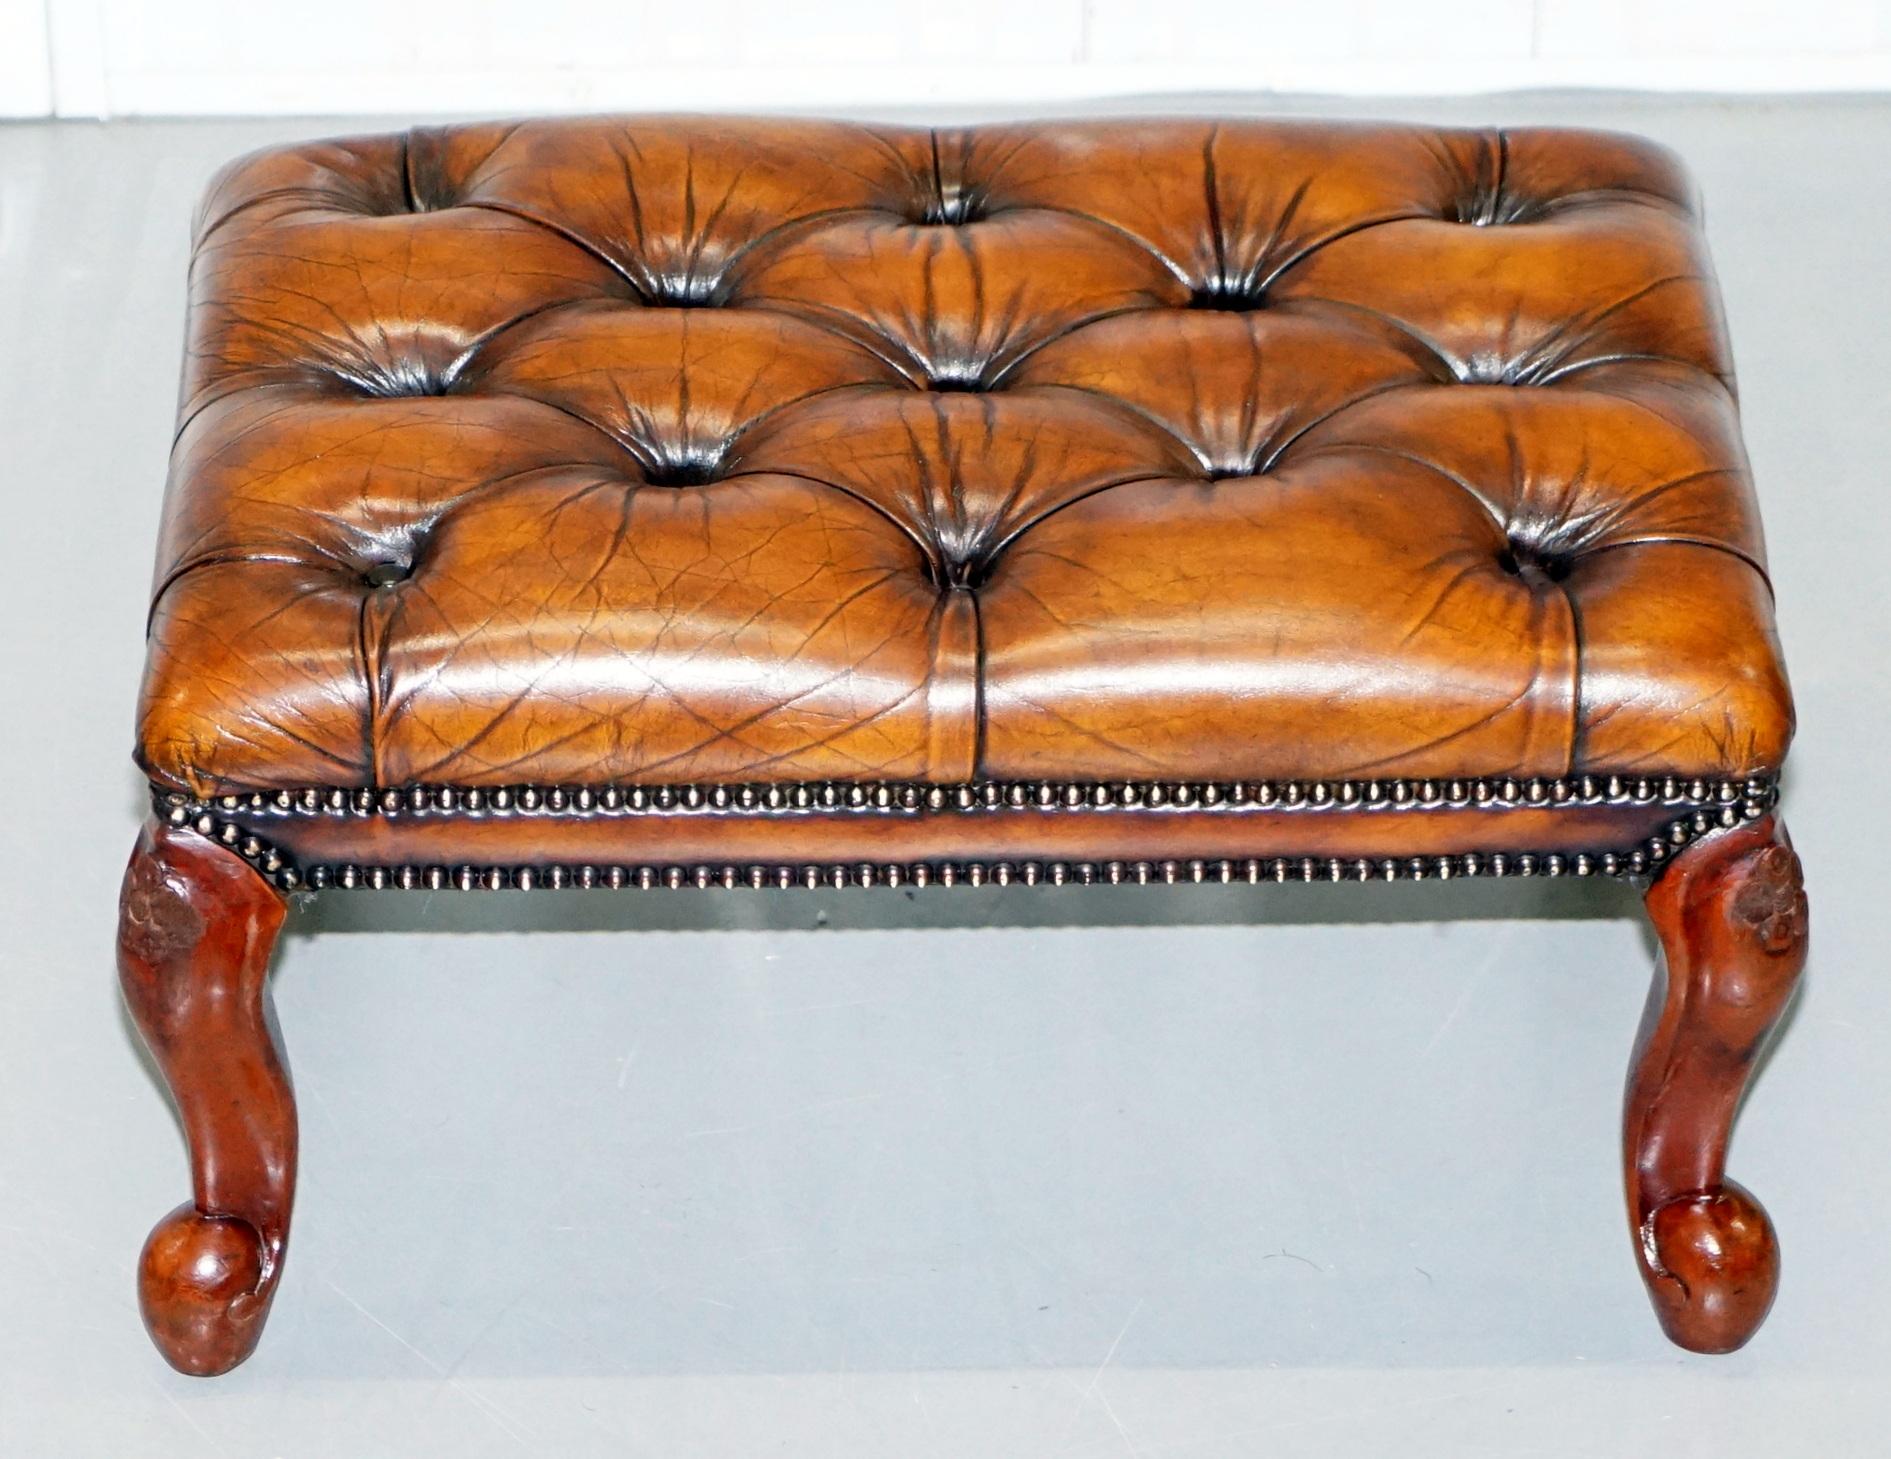 We are delighted to this absolutely stunning original vintage Chesterfield fully restored hand dyed whisky brown leather footstool with ornately carved legs

A very good looking and well made piece, the timber is all solid Mahogany, the legs have